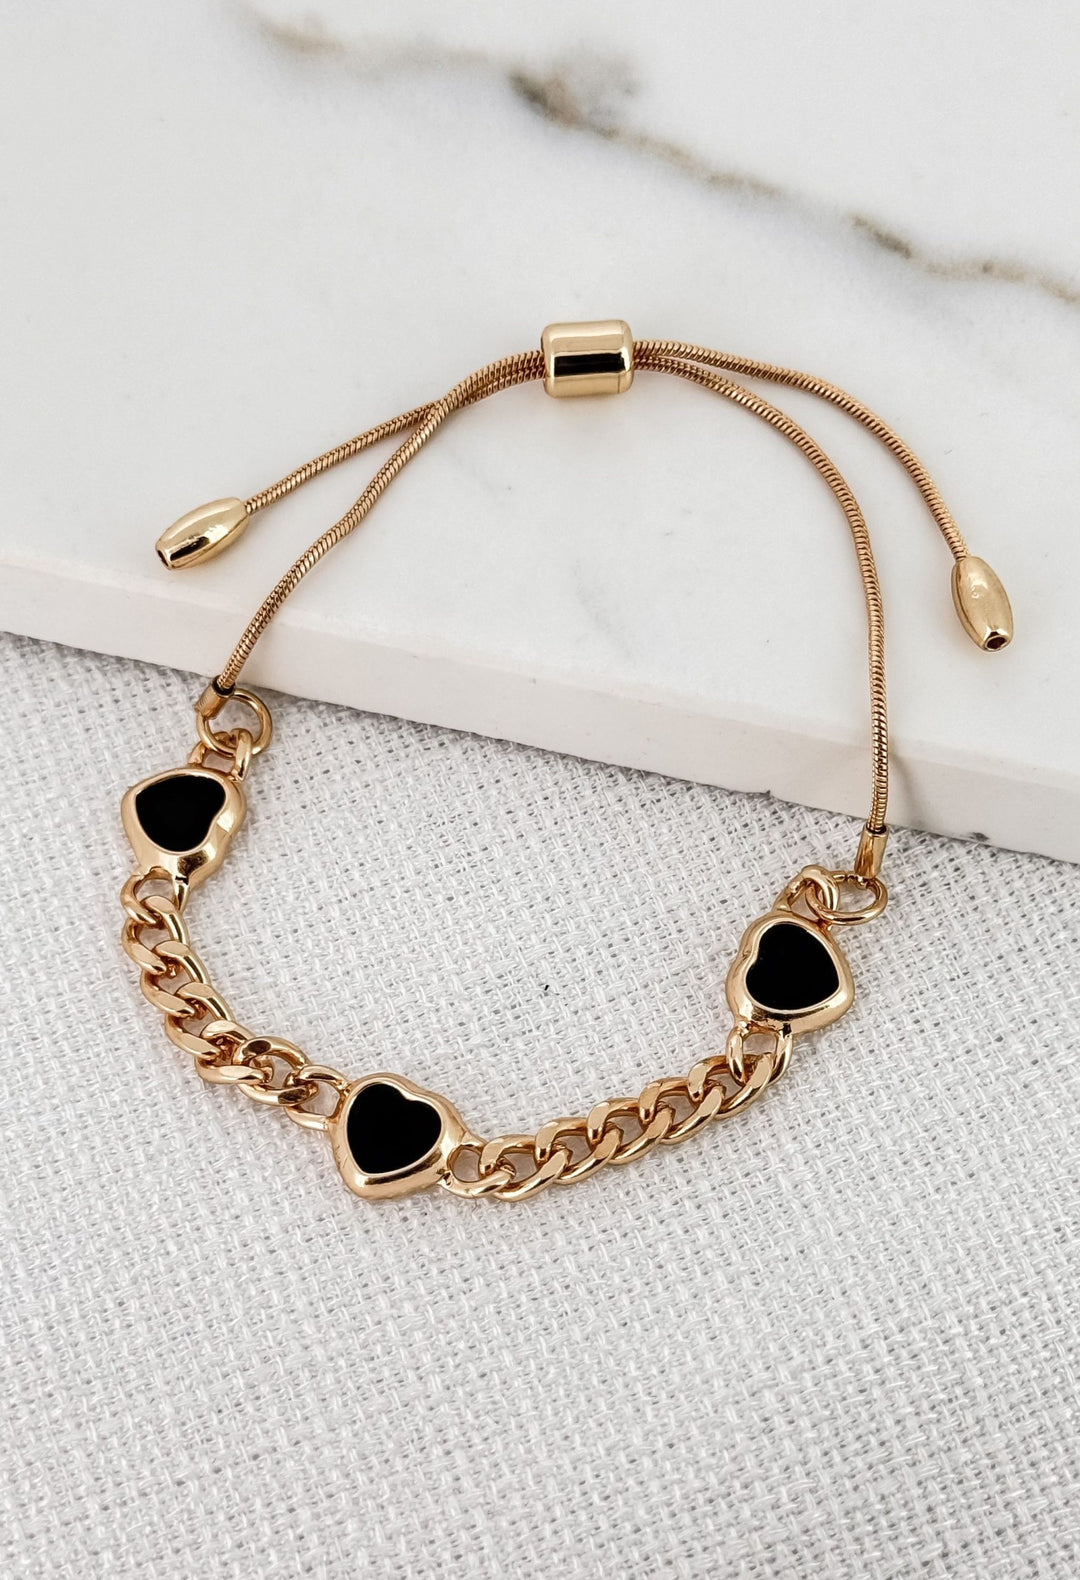 Gold Drawstring Chain Bracelet With Black Hearts 8802